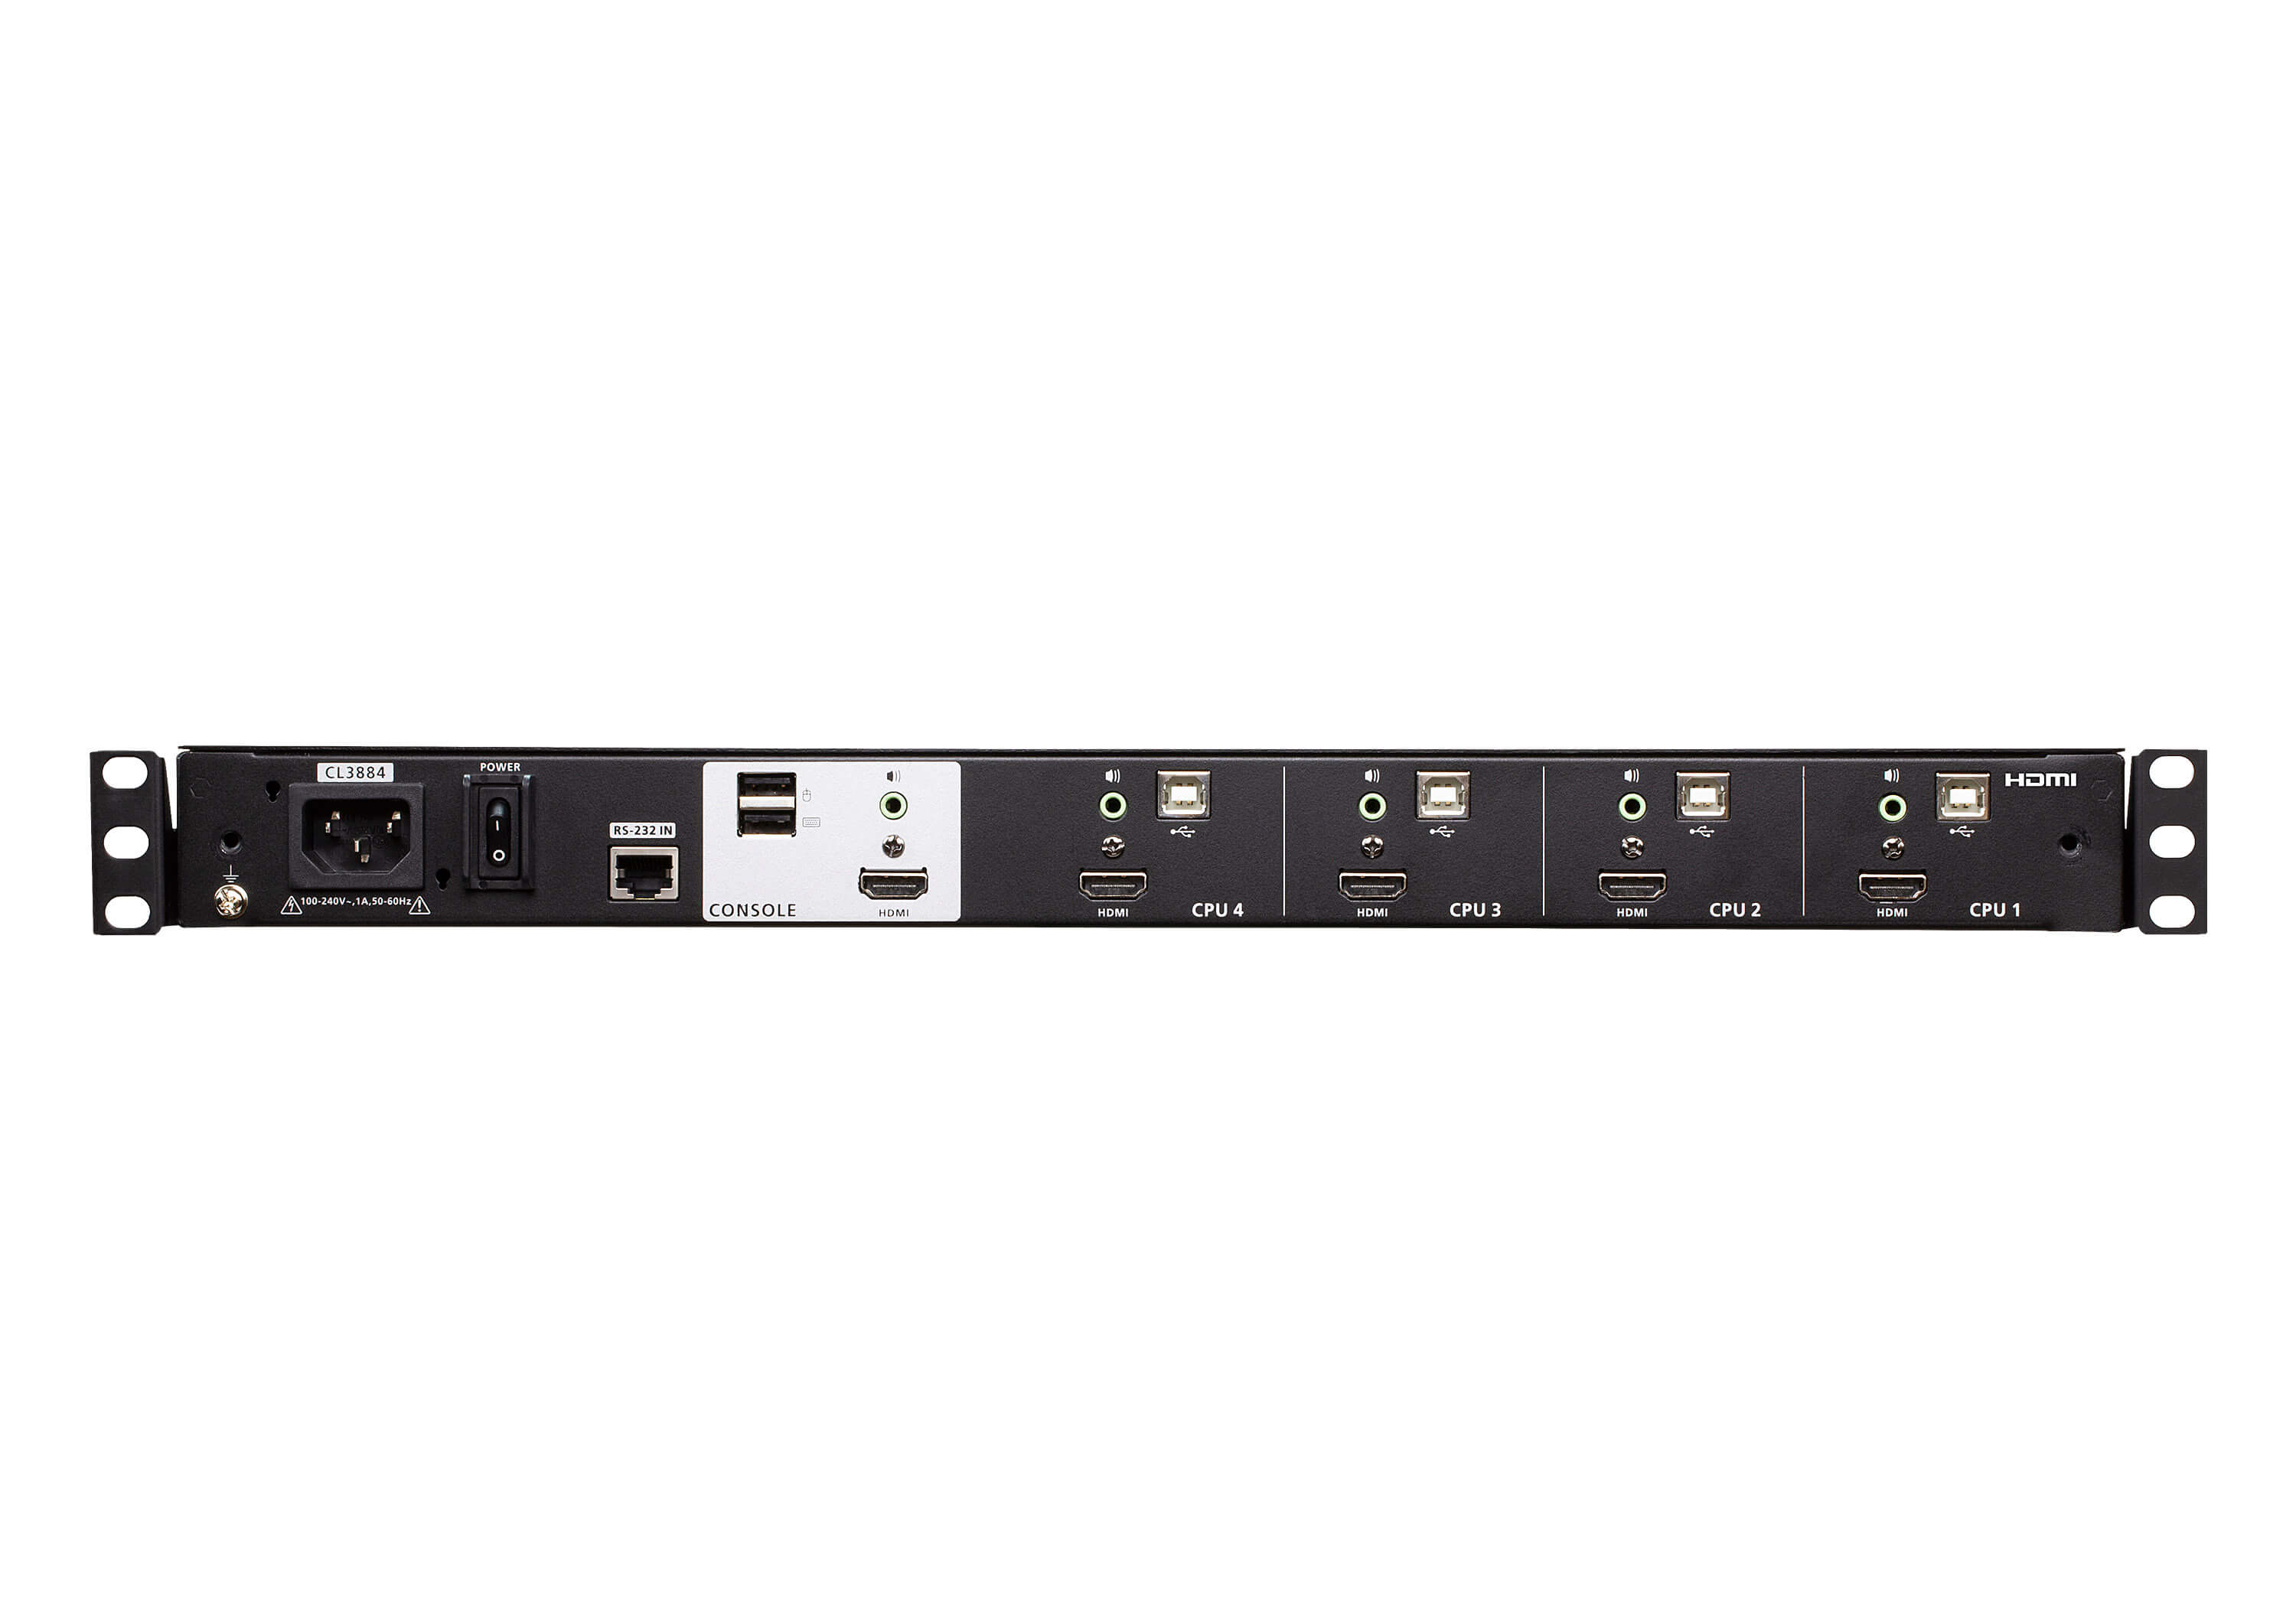 Aten 4-Port USB HDMI Multi-View Dual Rail WideScreen LCD KVM Switch- CL3884NW (3 Year Manufacture Local Warranty In Singapore)